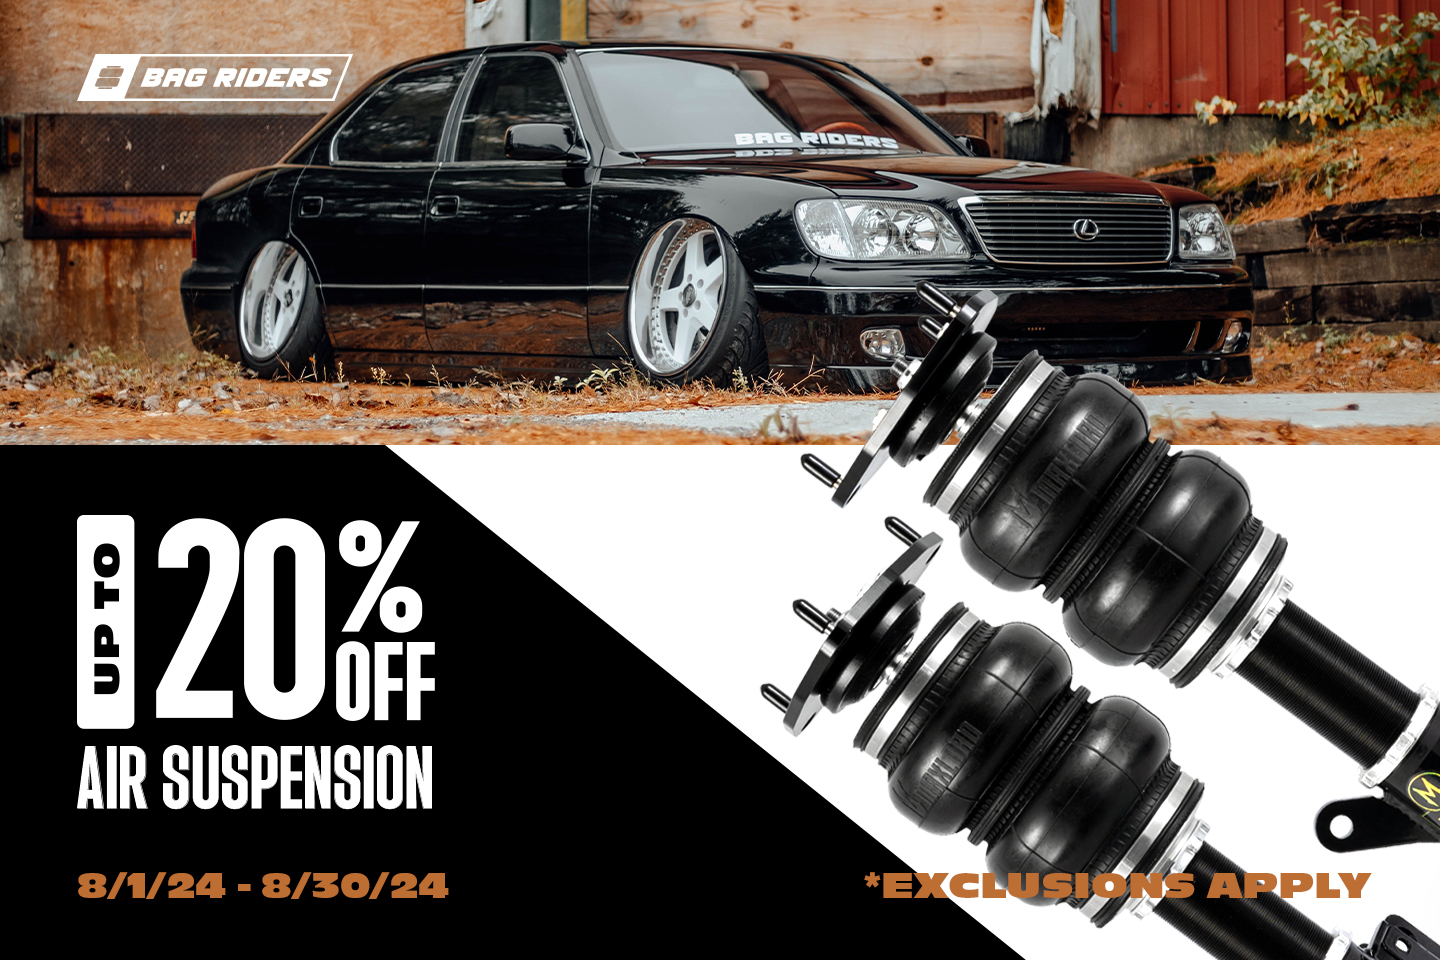 Up to 20% off Air Suspension